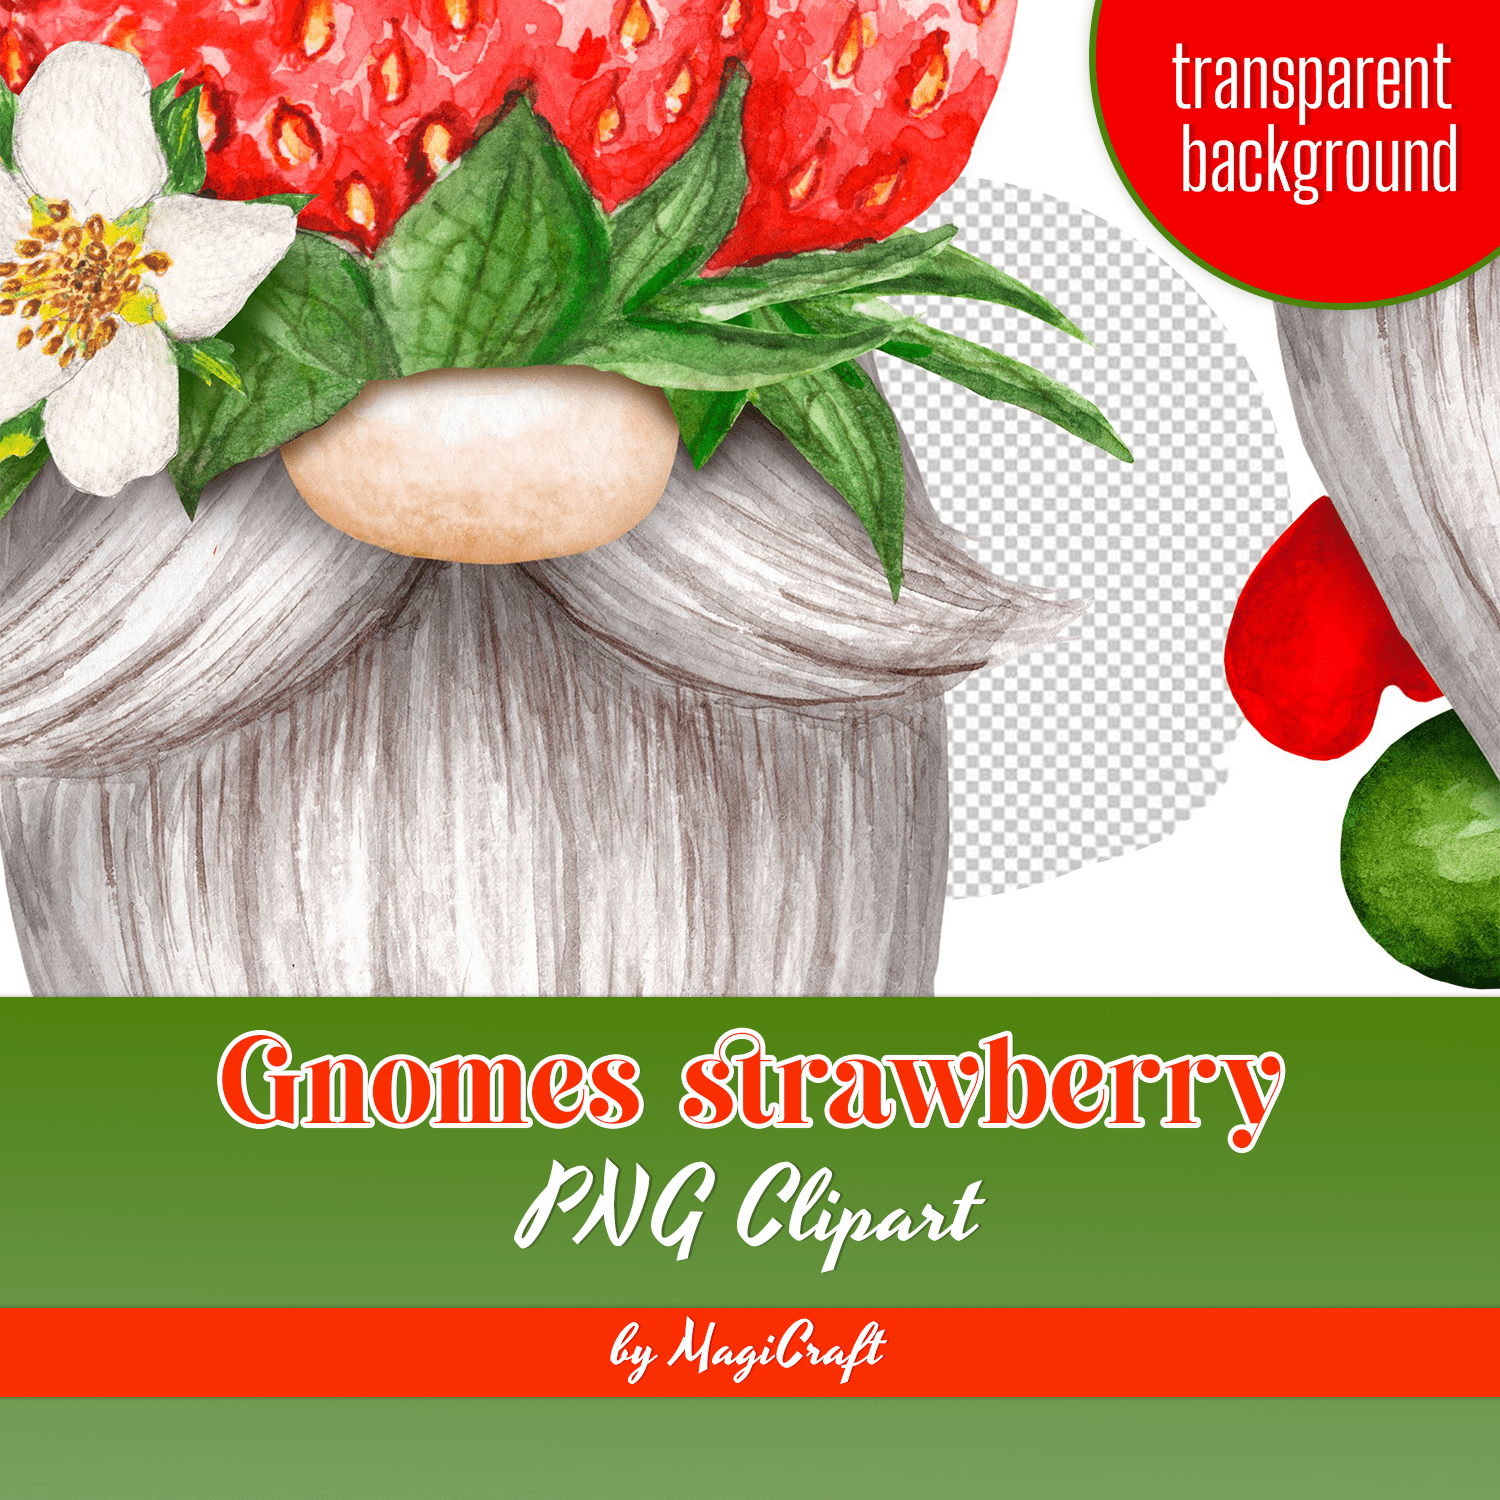 Gnomes Strawberry Png Clipart Watercolor Gonks Strawberry Cover.